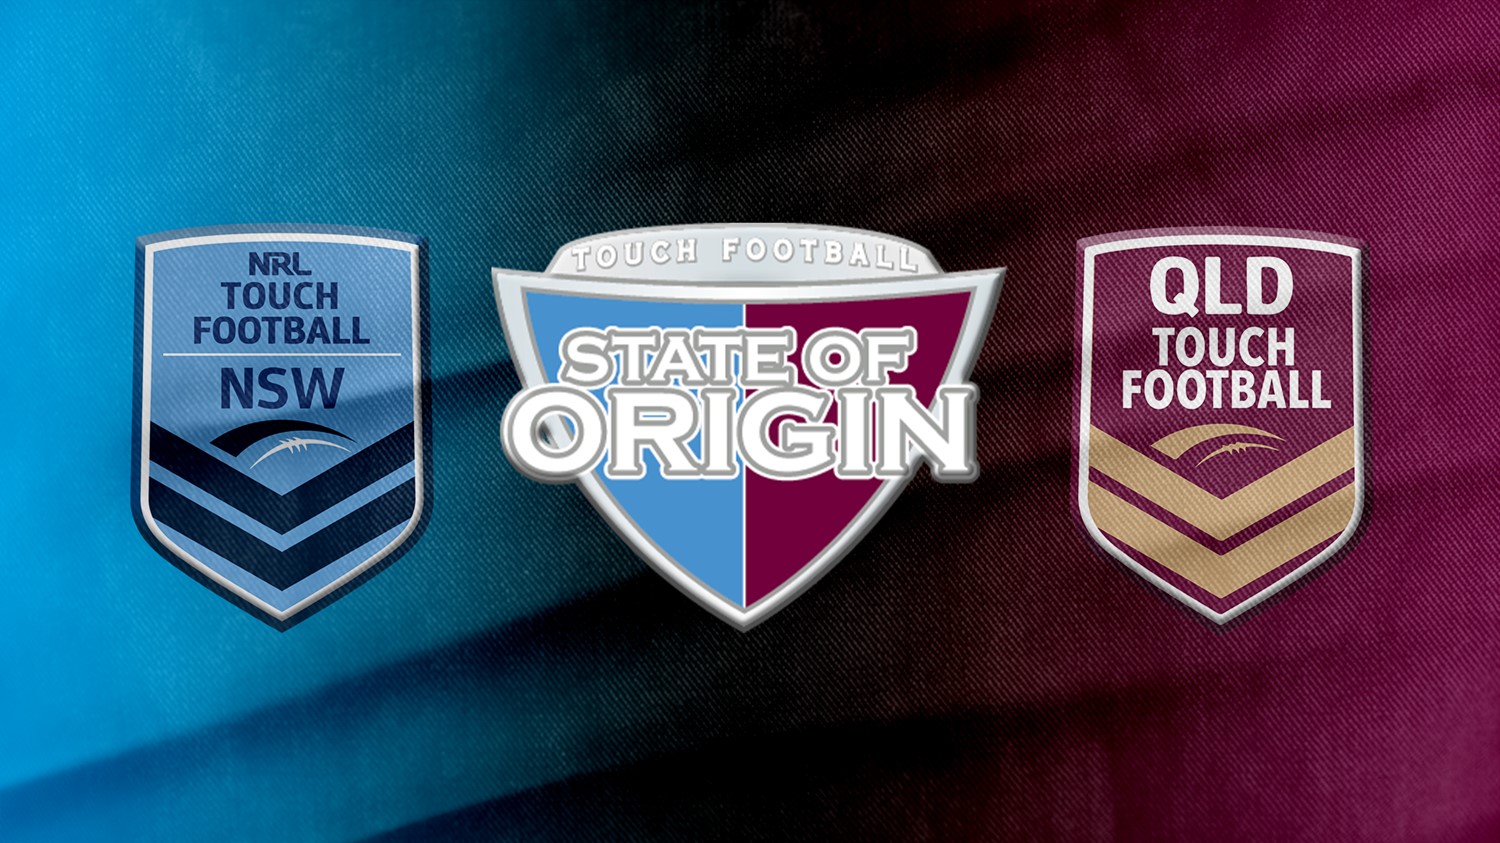 210619-State of Origin Men's Open - New South Wales v Queensland Minigame Slate Image